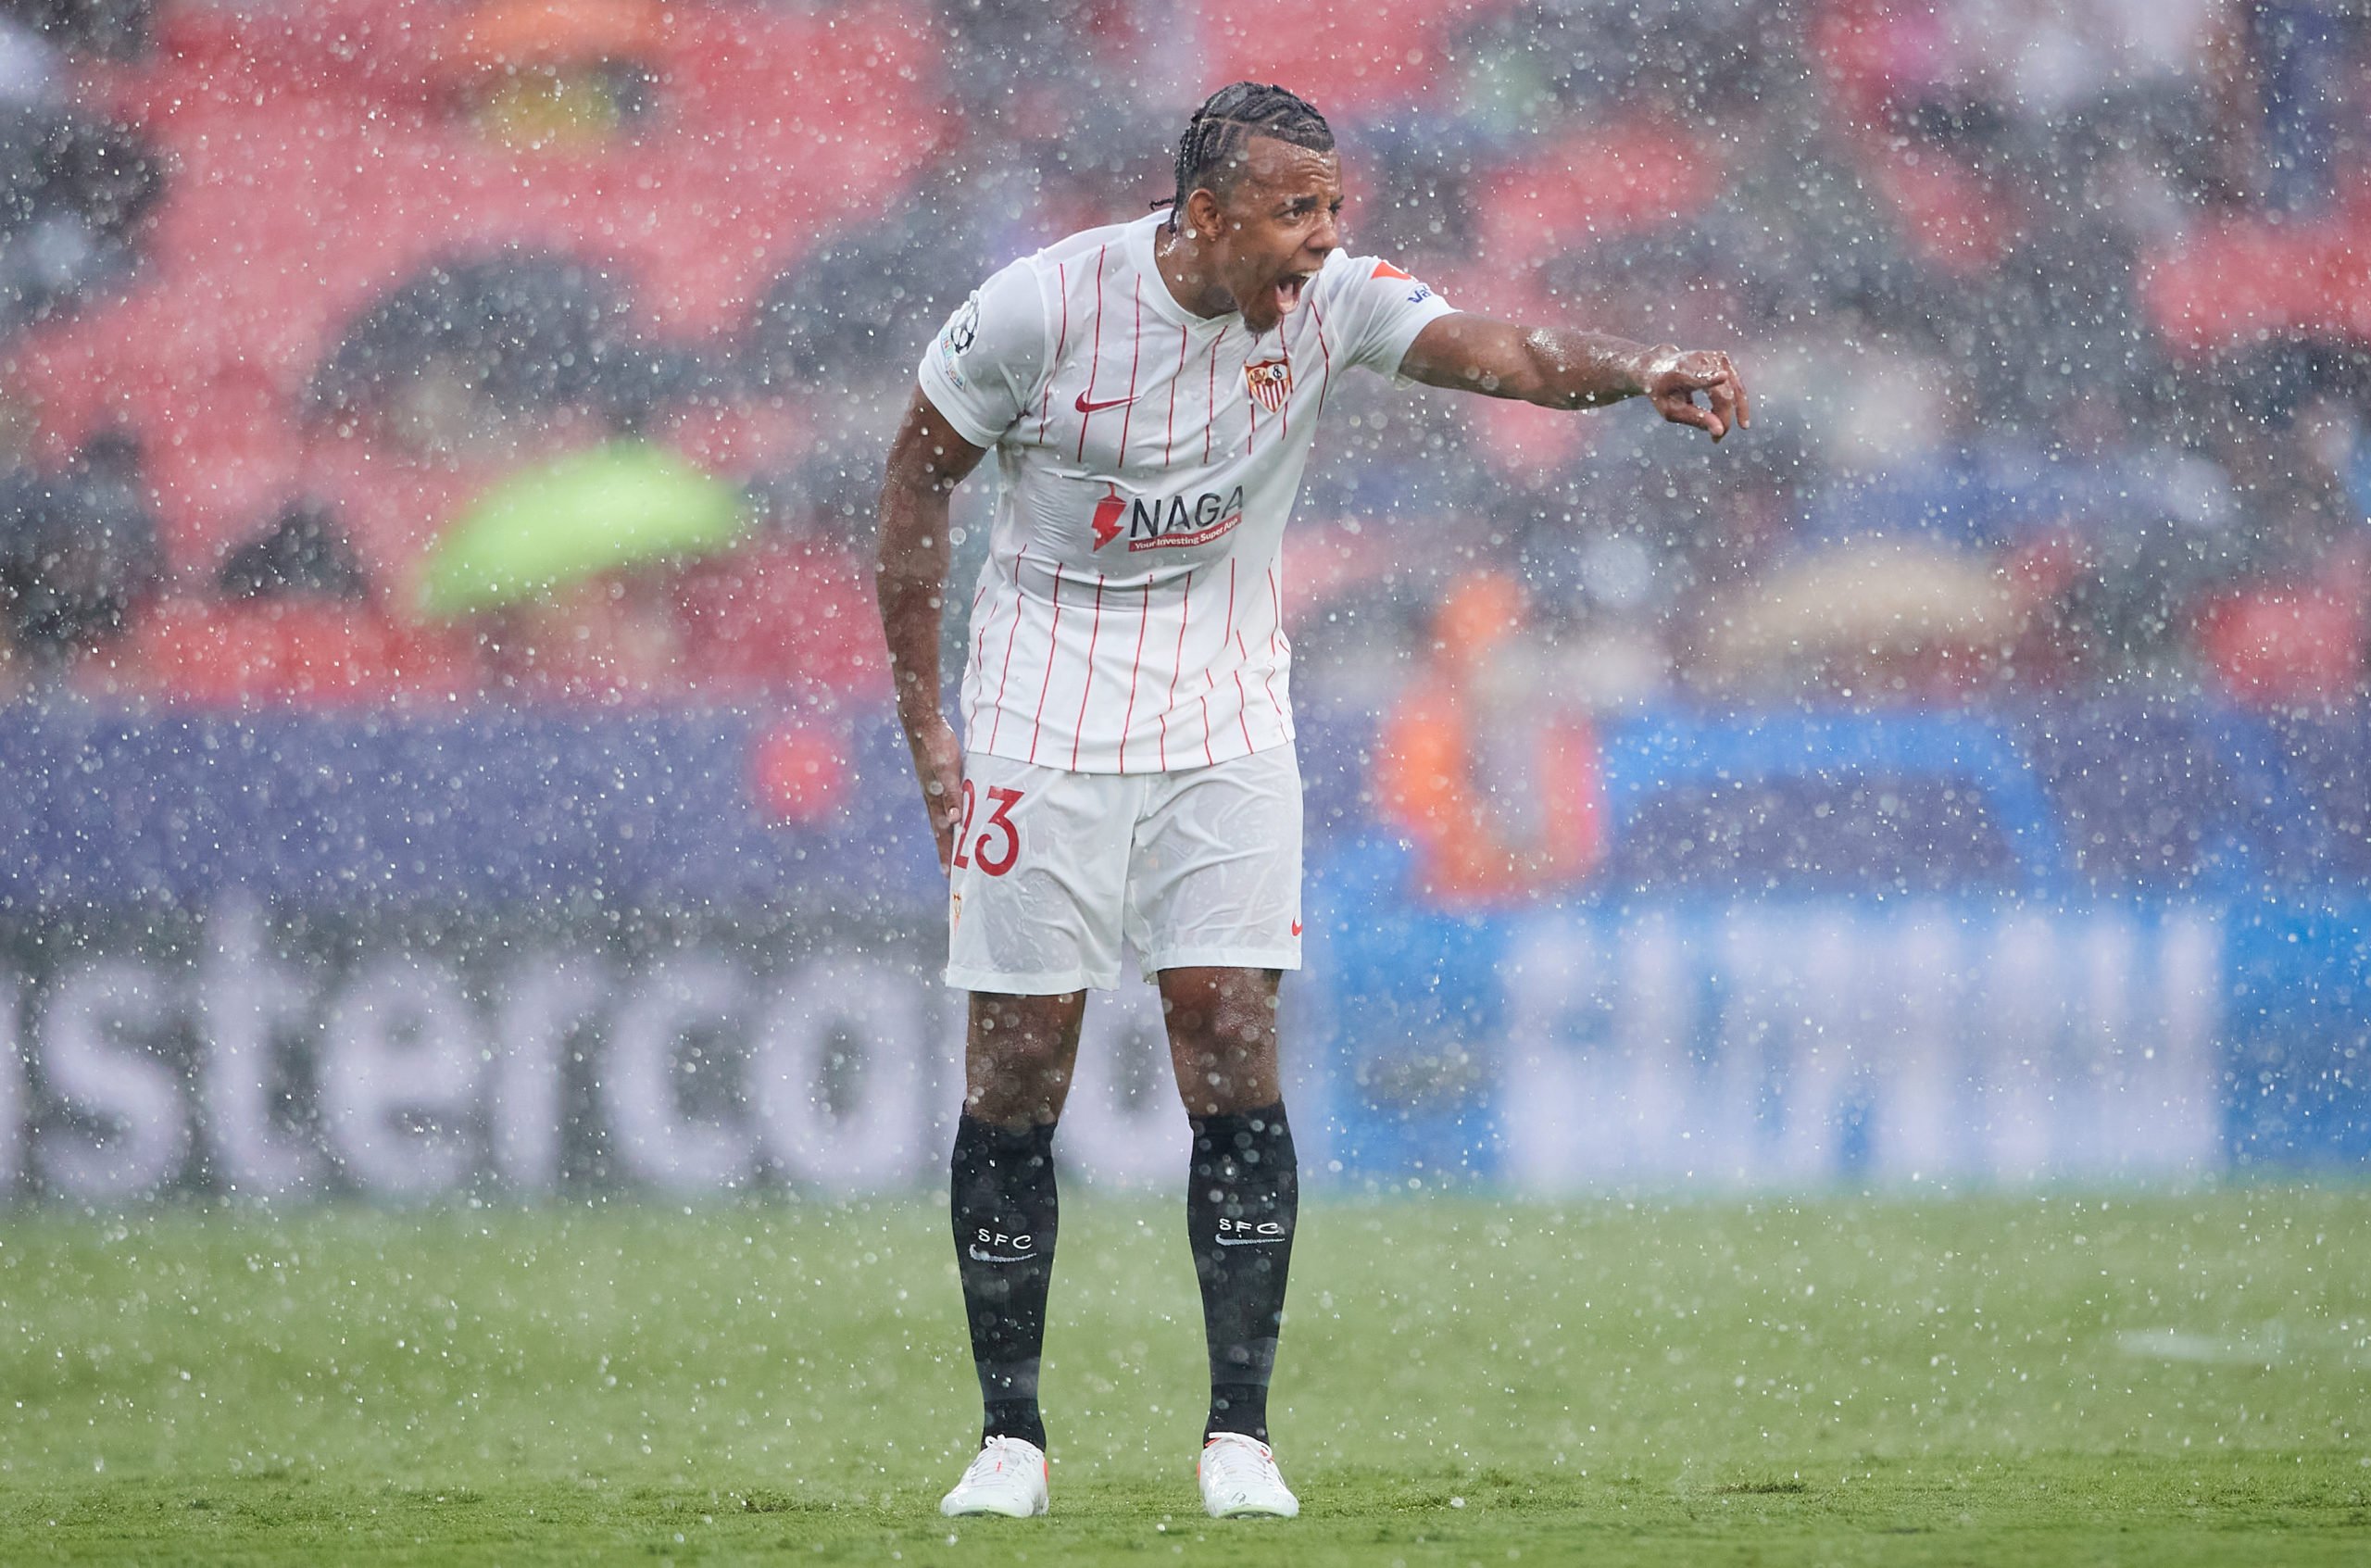 SEVILLE, SPAIN - SEPTEMBER 14: Jules Kounde of Sevilla FC reacts during the UEFA Champions League group G match between Sevilla FC and RB Salzburg at Estadio Ramon Sanchez Pizjuan on September 14, 2021 in Seville, Spain. (Photo by Fran Santiago/Getty Images)The 4th Official uses images provided by the following image agency: Getty Images (https://www.gettyimages.de/) Imago Images (https://www.imago-images.de/)